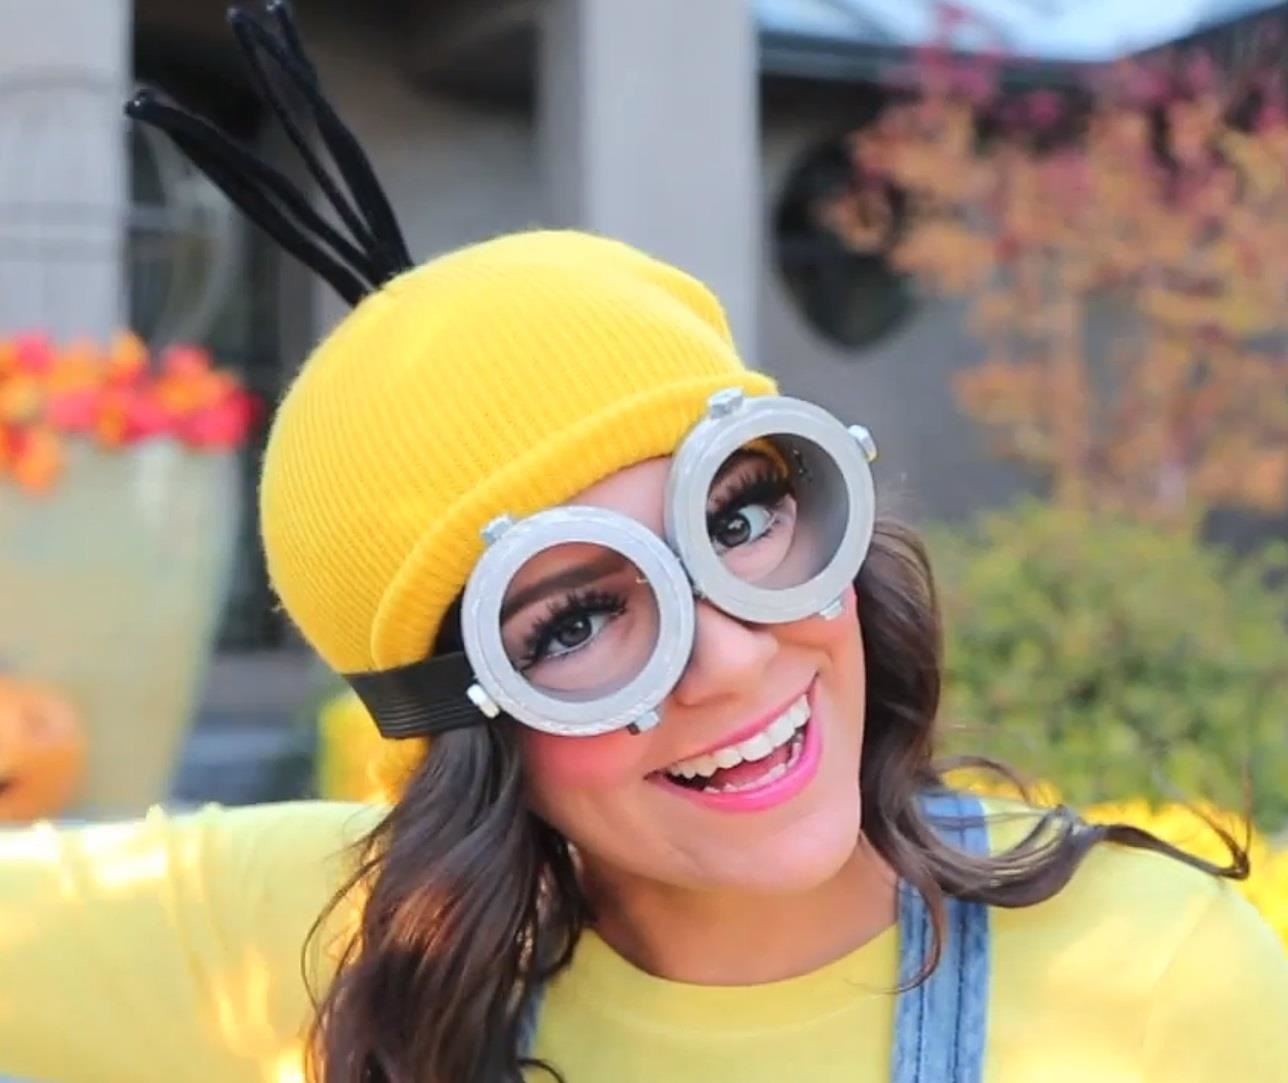 principle leader Diploma Bee-Do, Bee-Do! 5 Awesome DIY Minion Halloween Costumes from 'Despicable Me'  « Halloween Ideas :: WonderHowTo